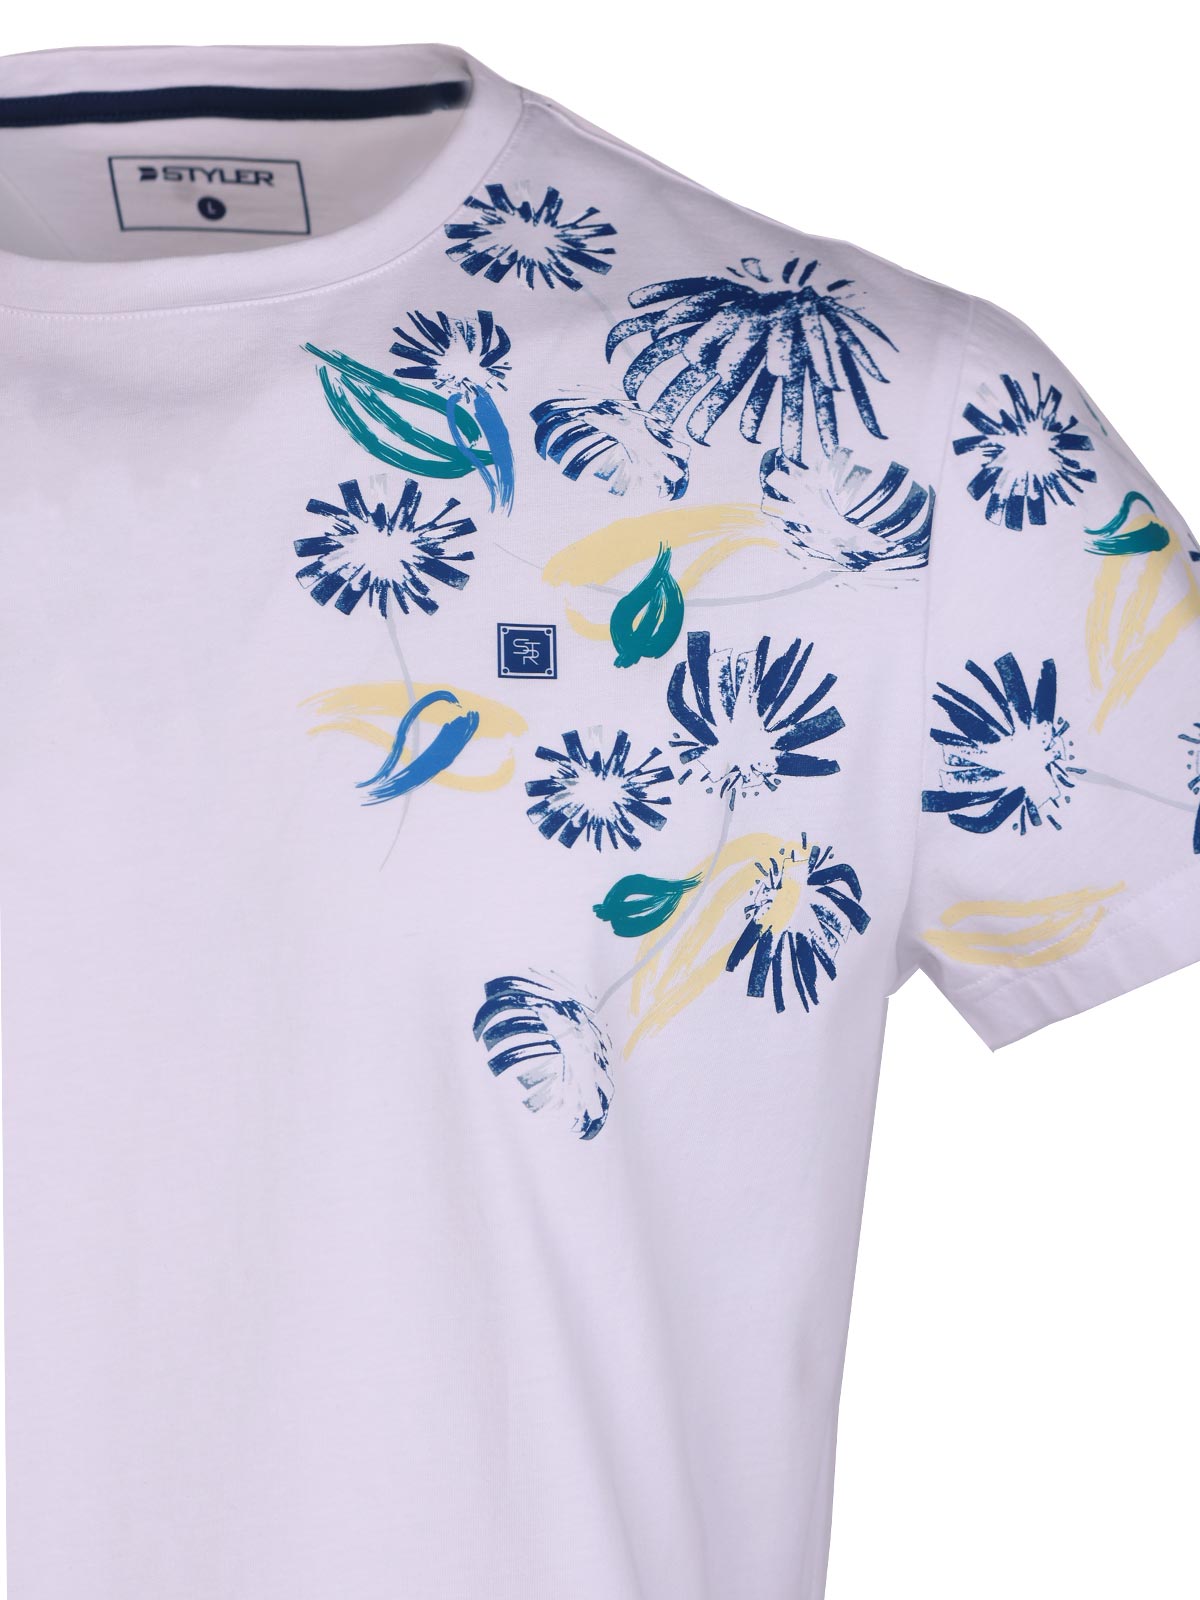 Tshirt in white with blue leaves - 96471 € 27.56 img2